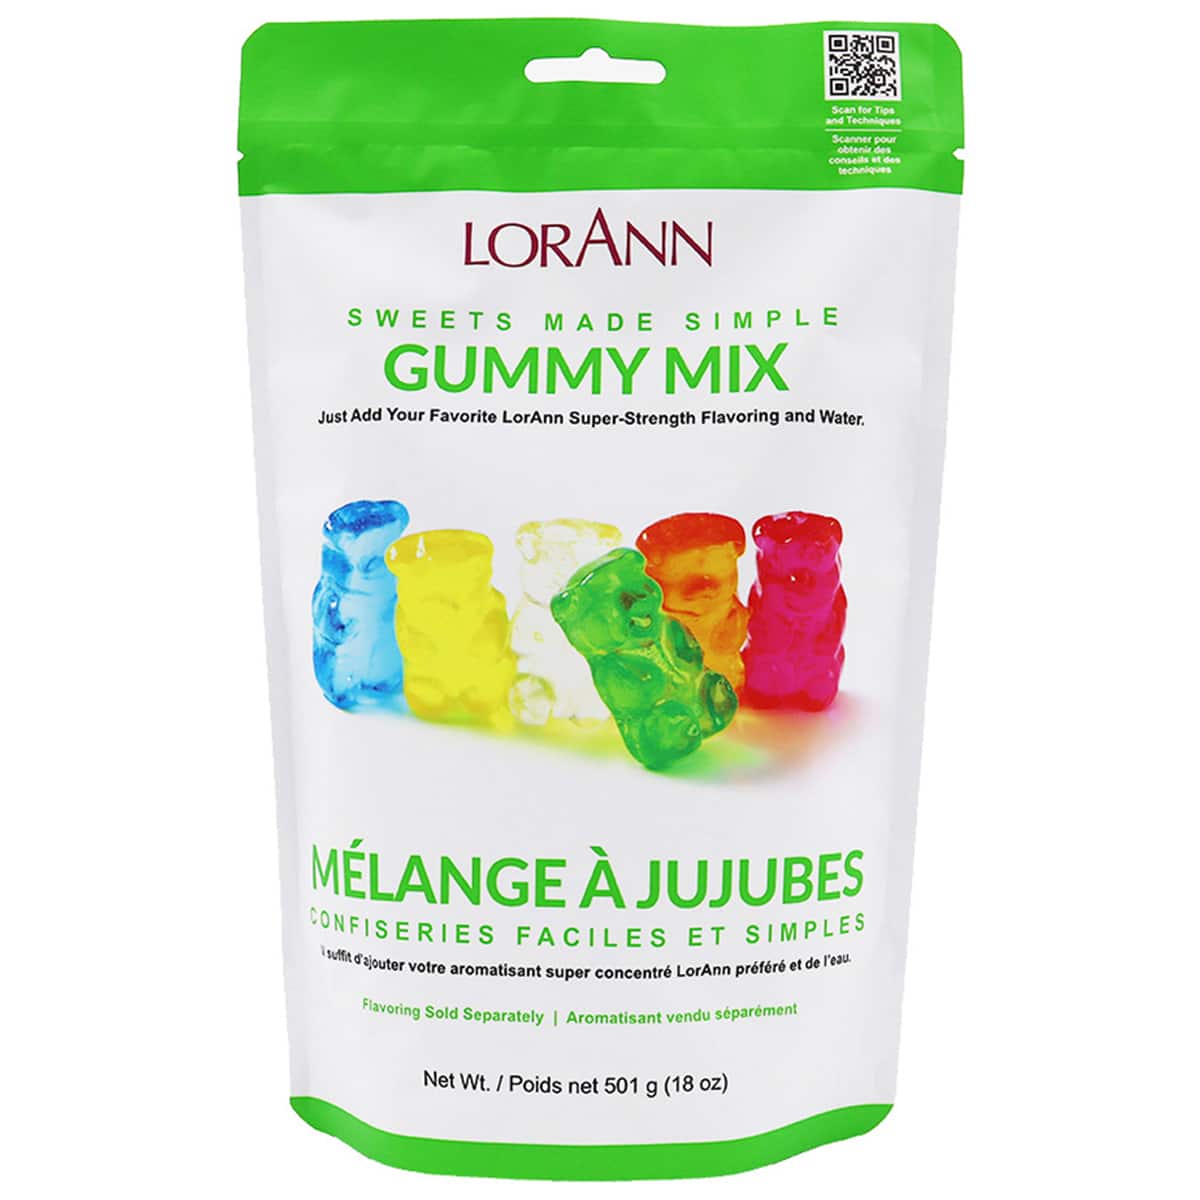 4x Gummy Bear/Worm Mold Candy Making Supplies Chocolate Ice Maker